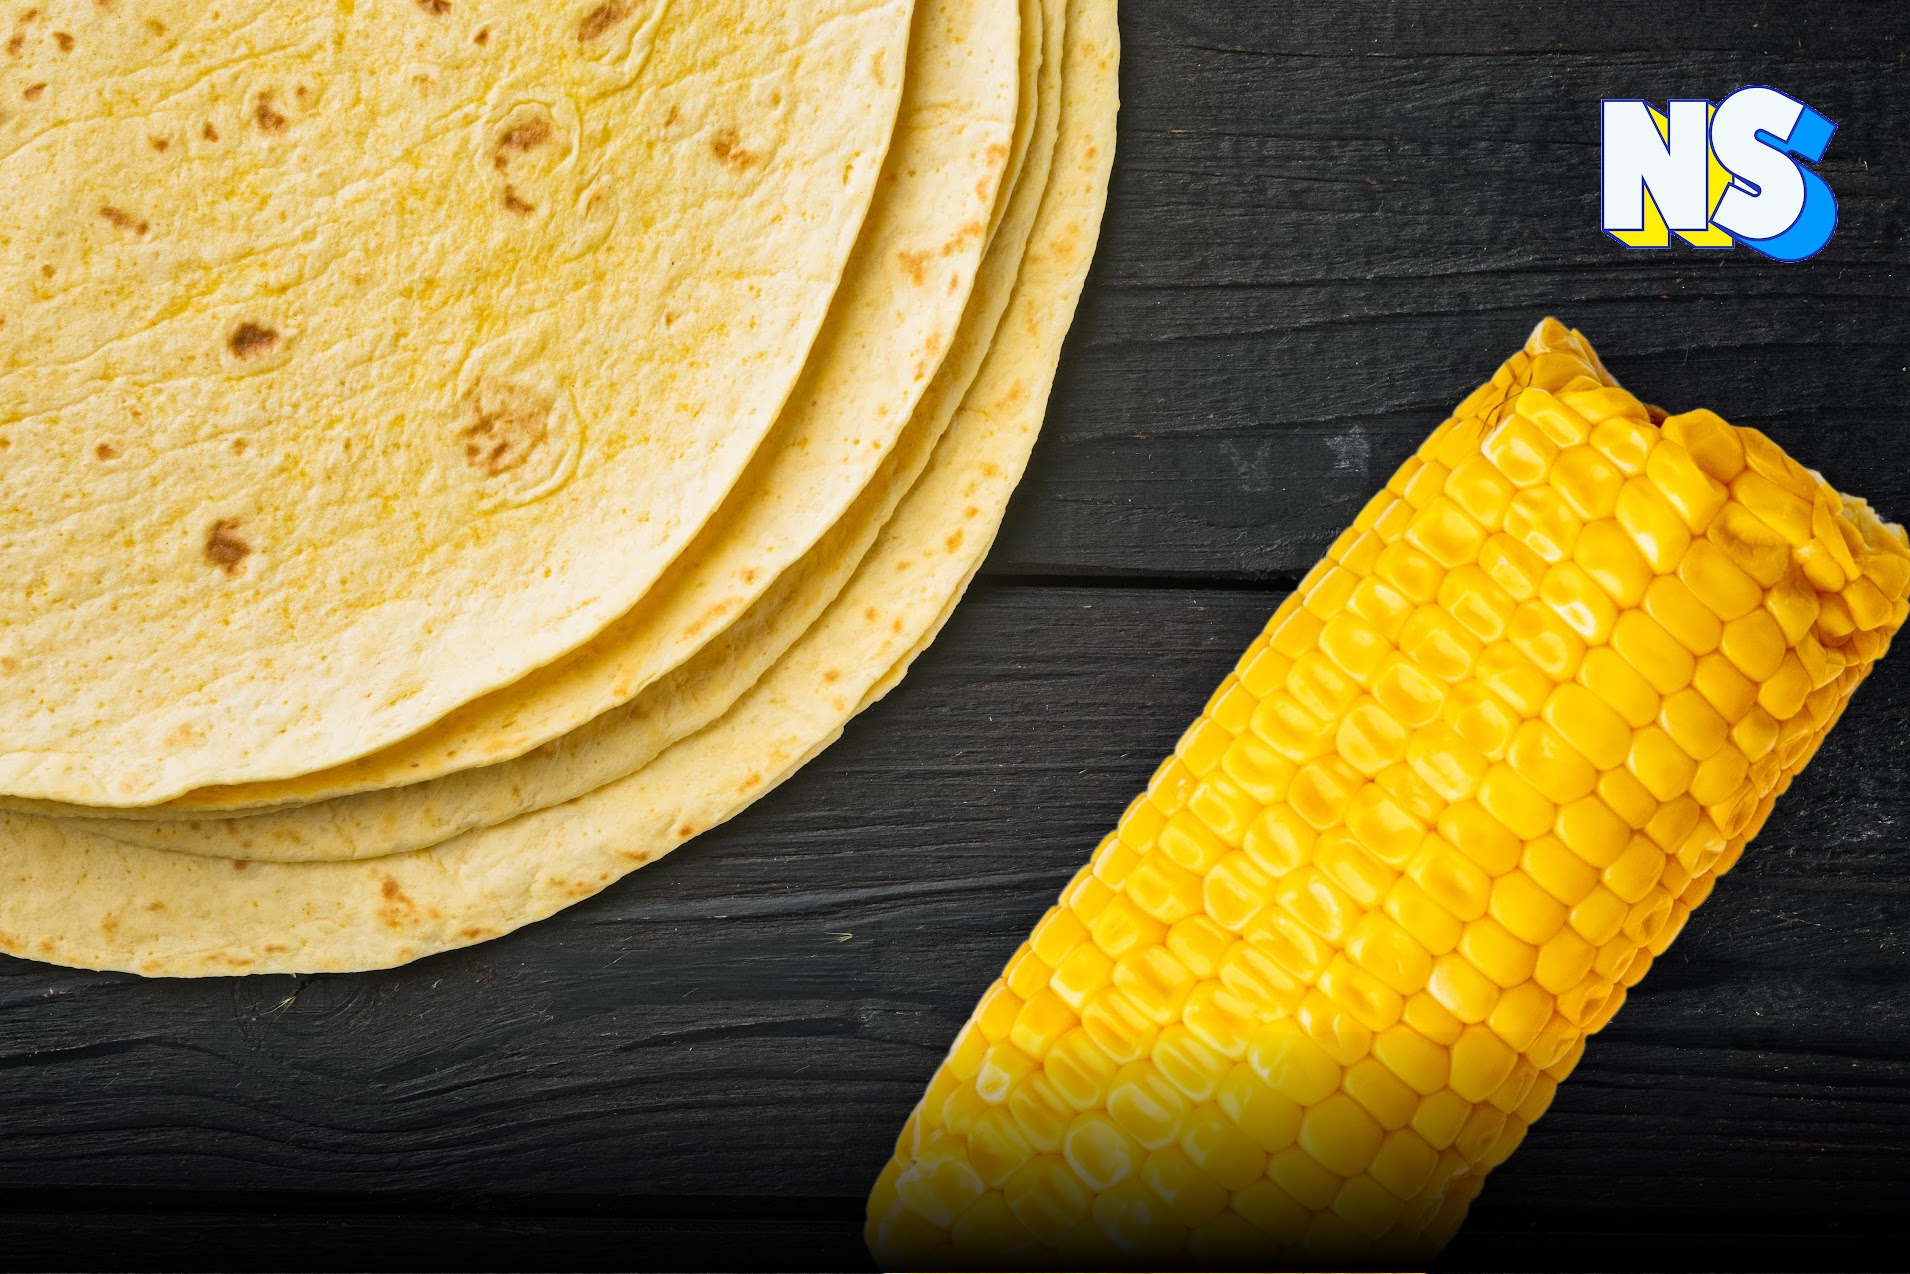 Did You Know Corn Sells More Than Hamburgers and Hot Dogs in the U.S.? Nuestro Stories